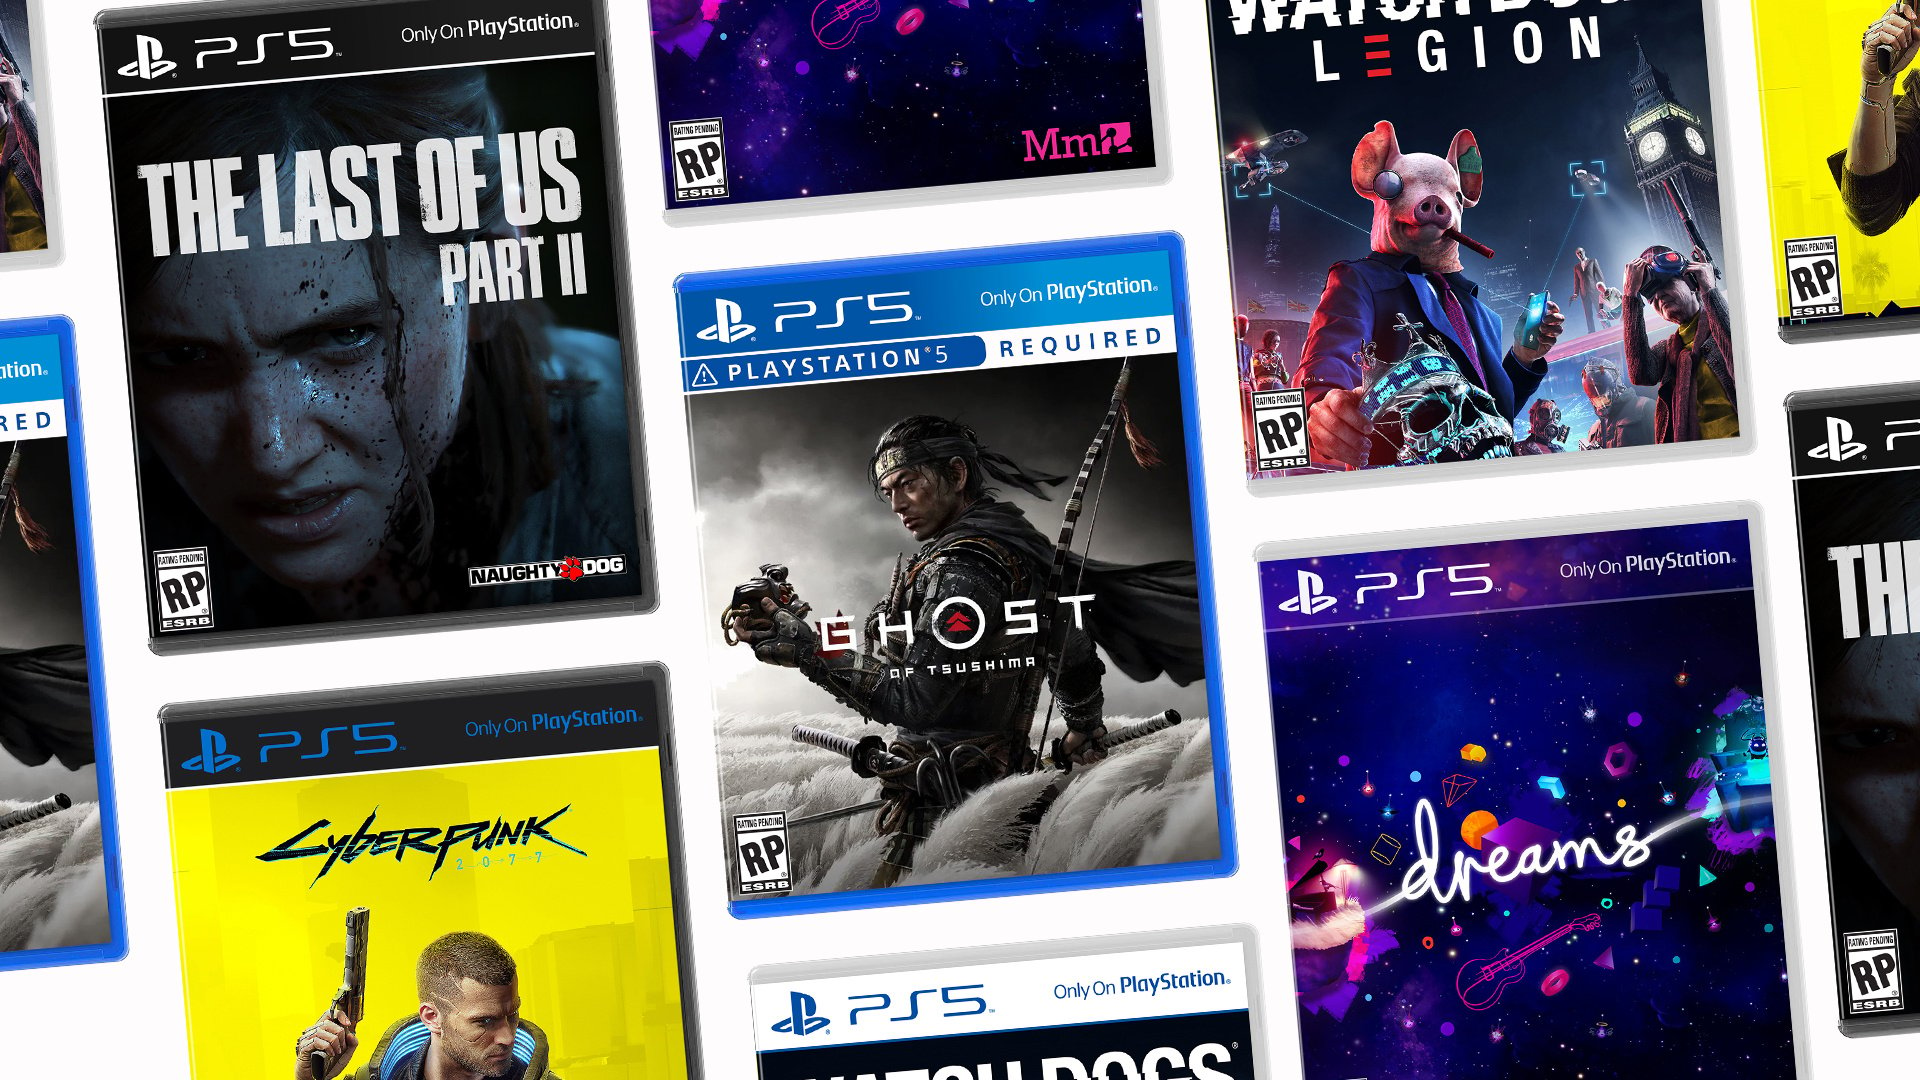 what games will the ps5 have